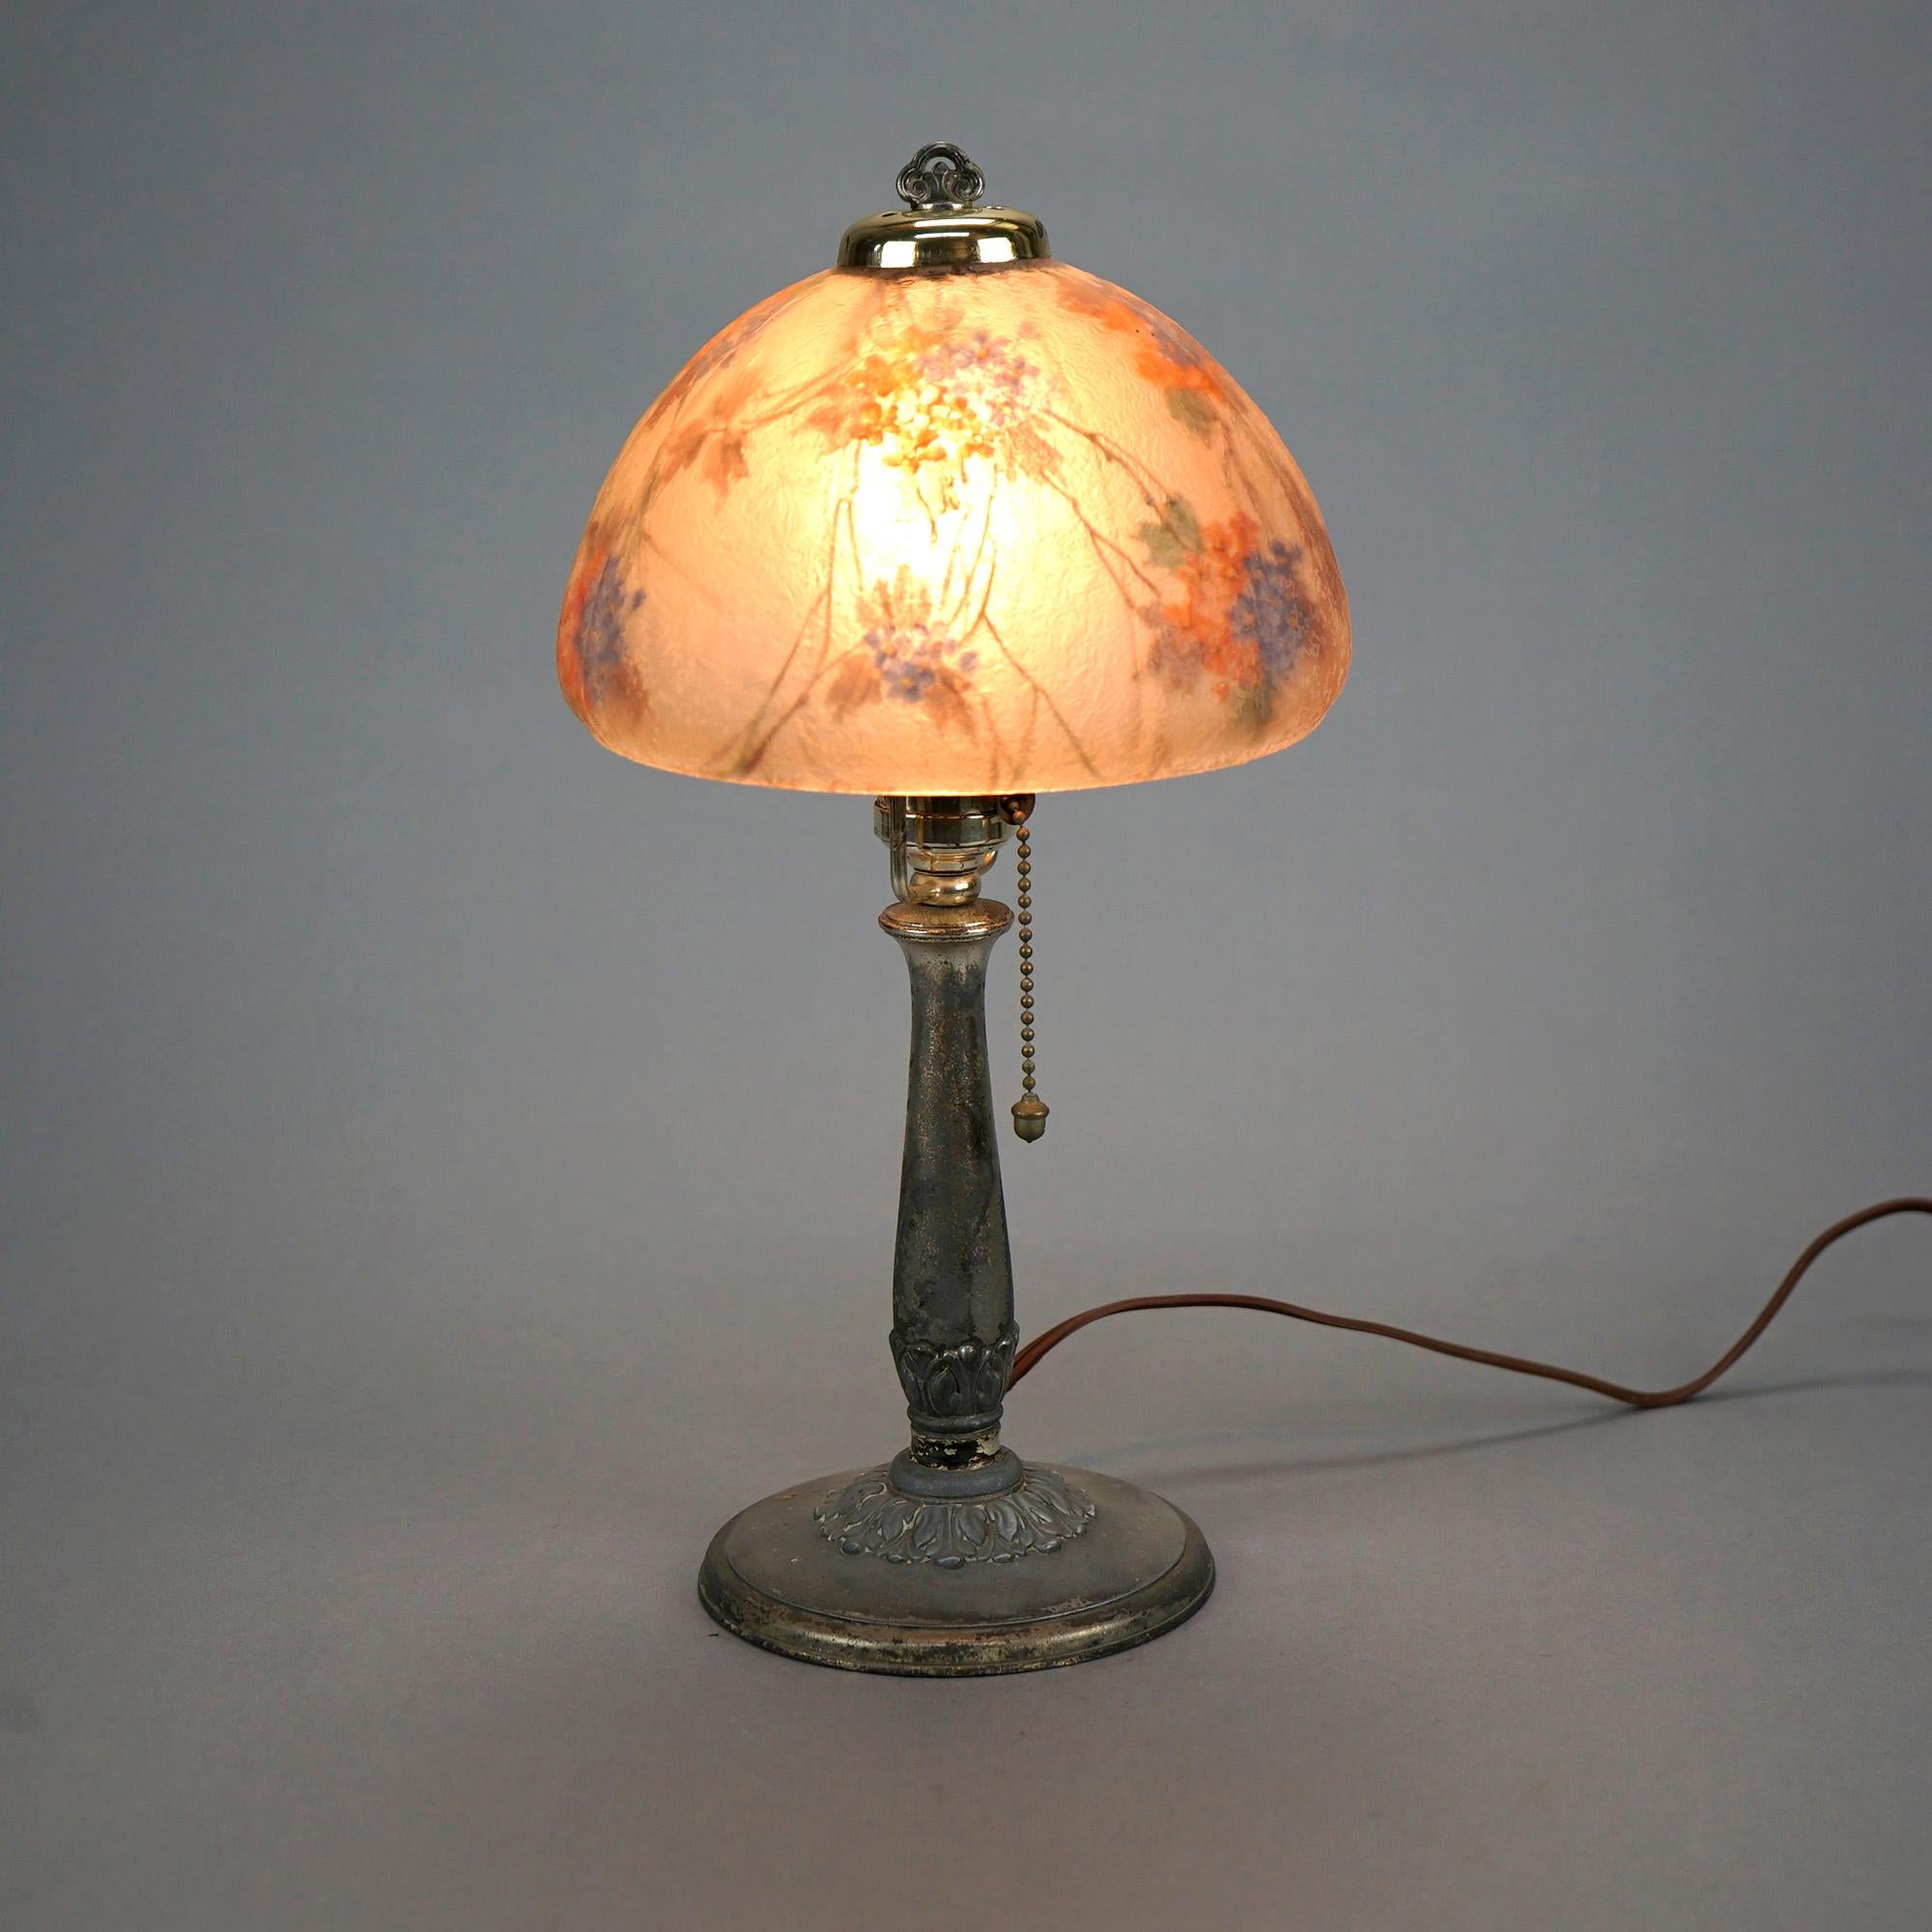 An antique boudoir lamp by Handel offers floral reverse painted dome form glass shade over single socket cast base, shade signed and base with maker label as photographed, c1920

Measures- 14.25''H x 7.25''W x 7.5''D.